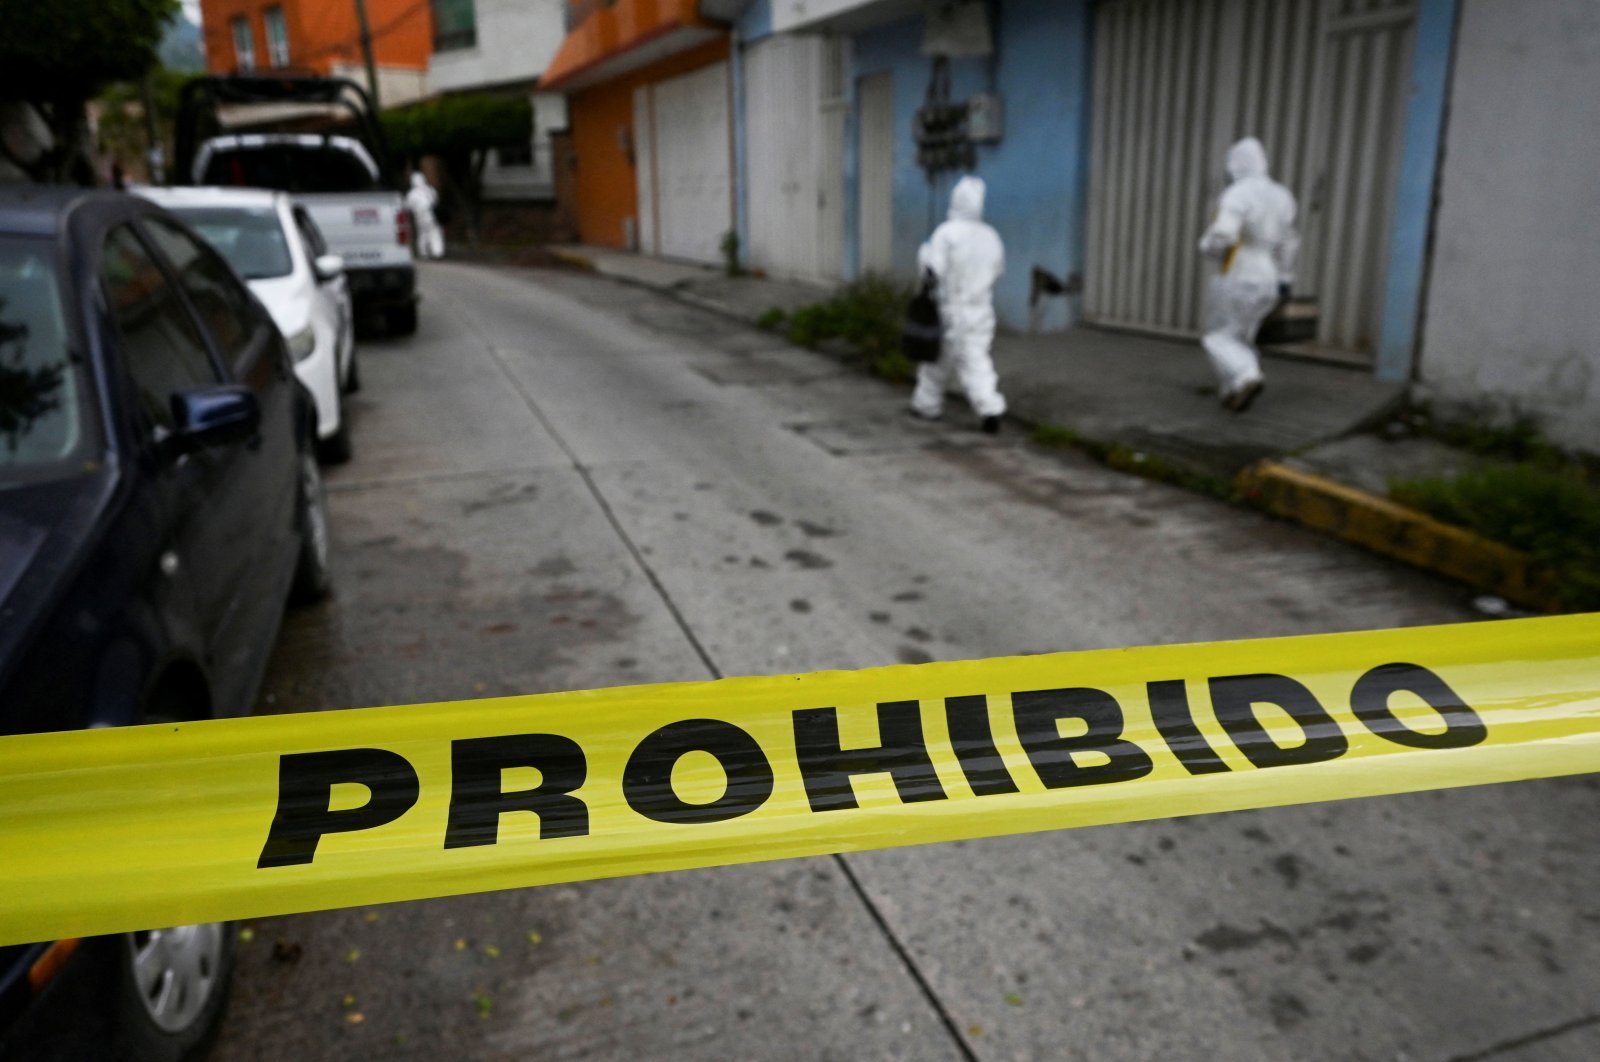 Members of a forensic team walk near a crime scene where journalist Fredid Roman was killed in his car by armed attackers on a motorcycle in Chilpancingo, Guerrero state, Mexico, Aug. 22, 2022.  (Reuters Photo)